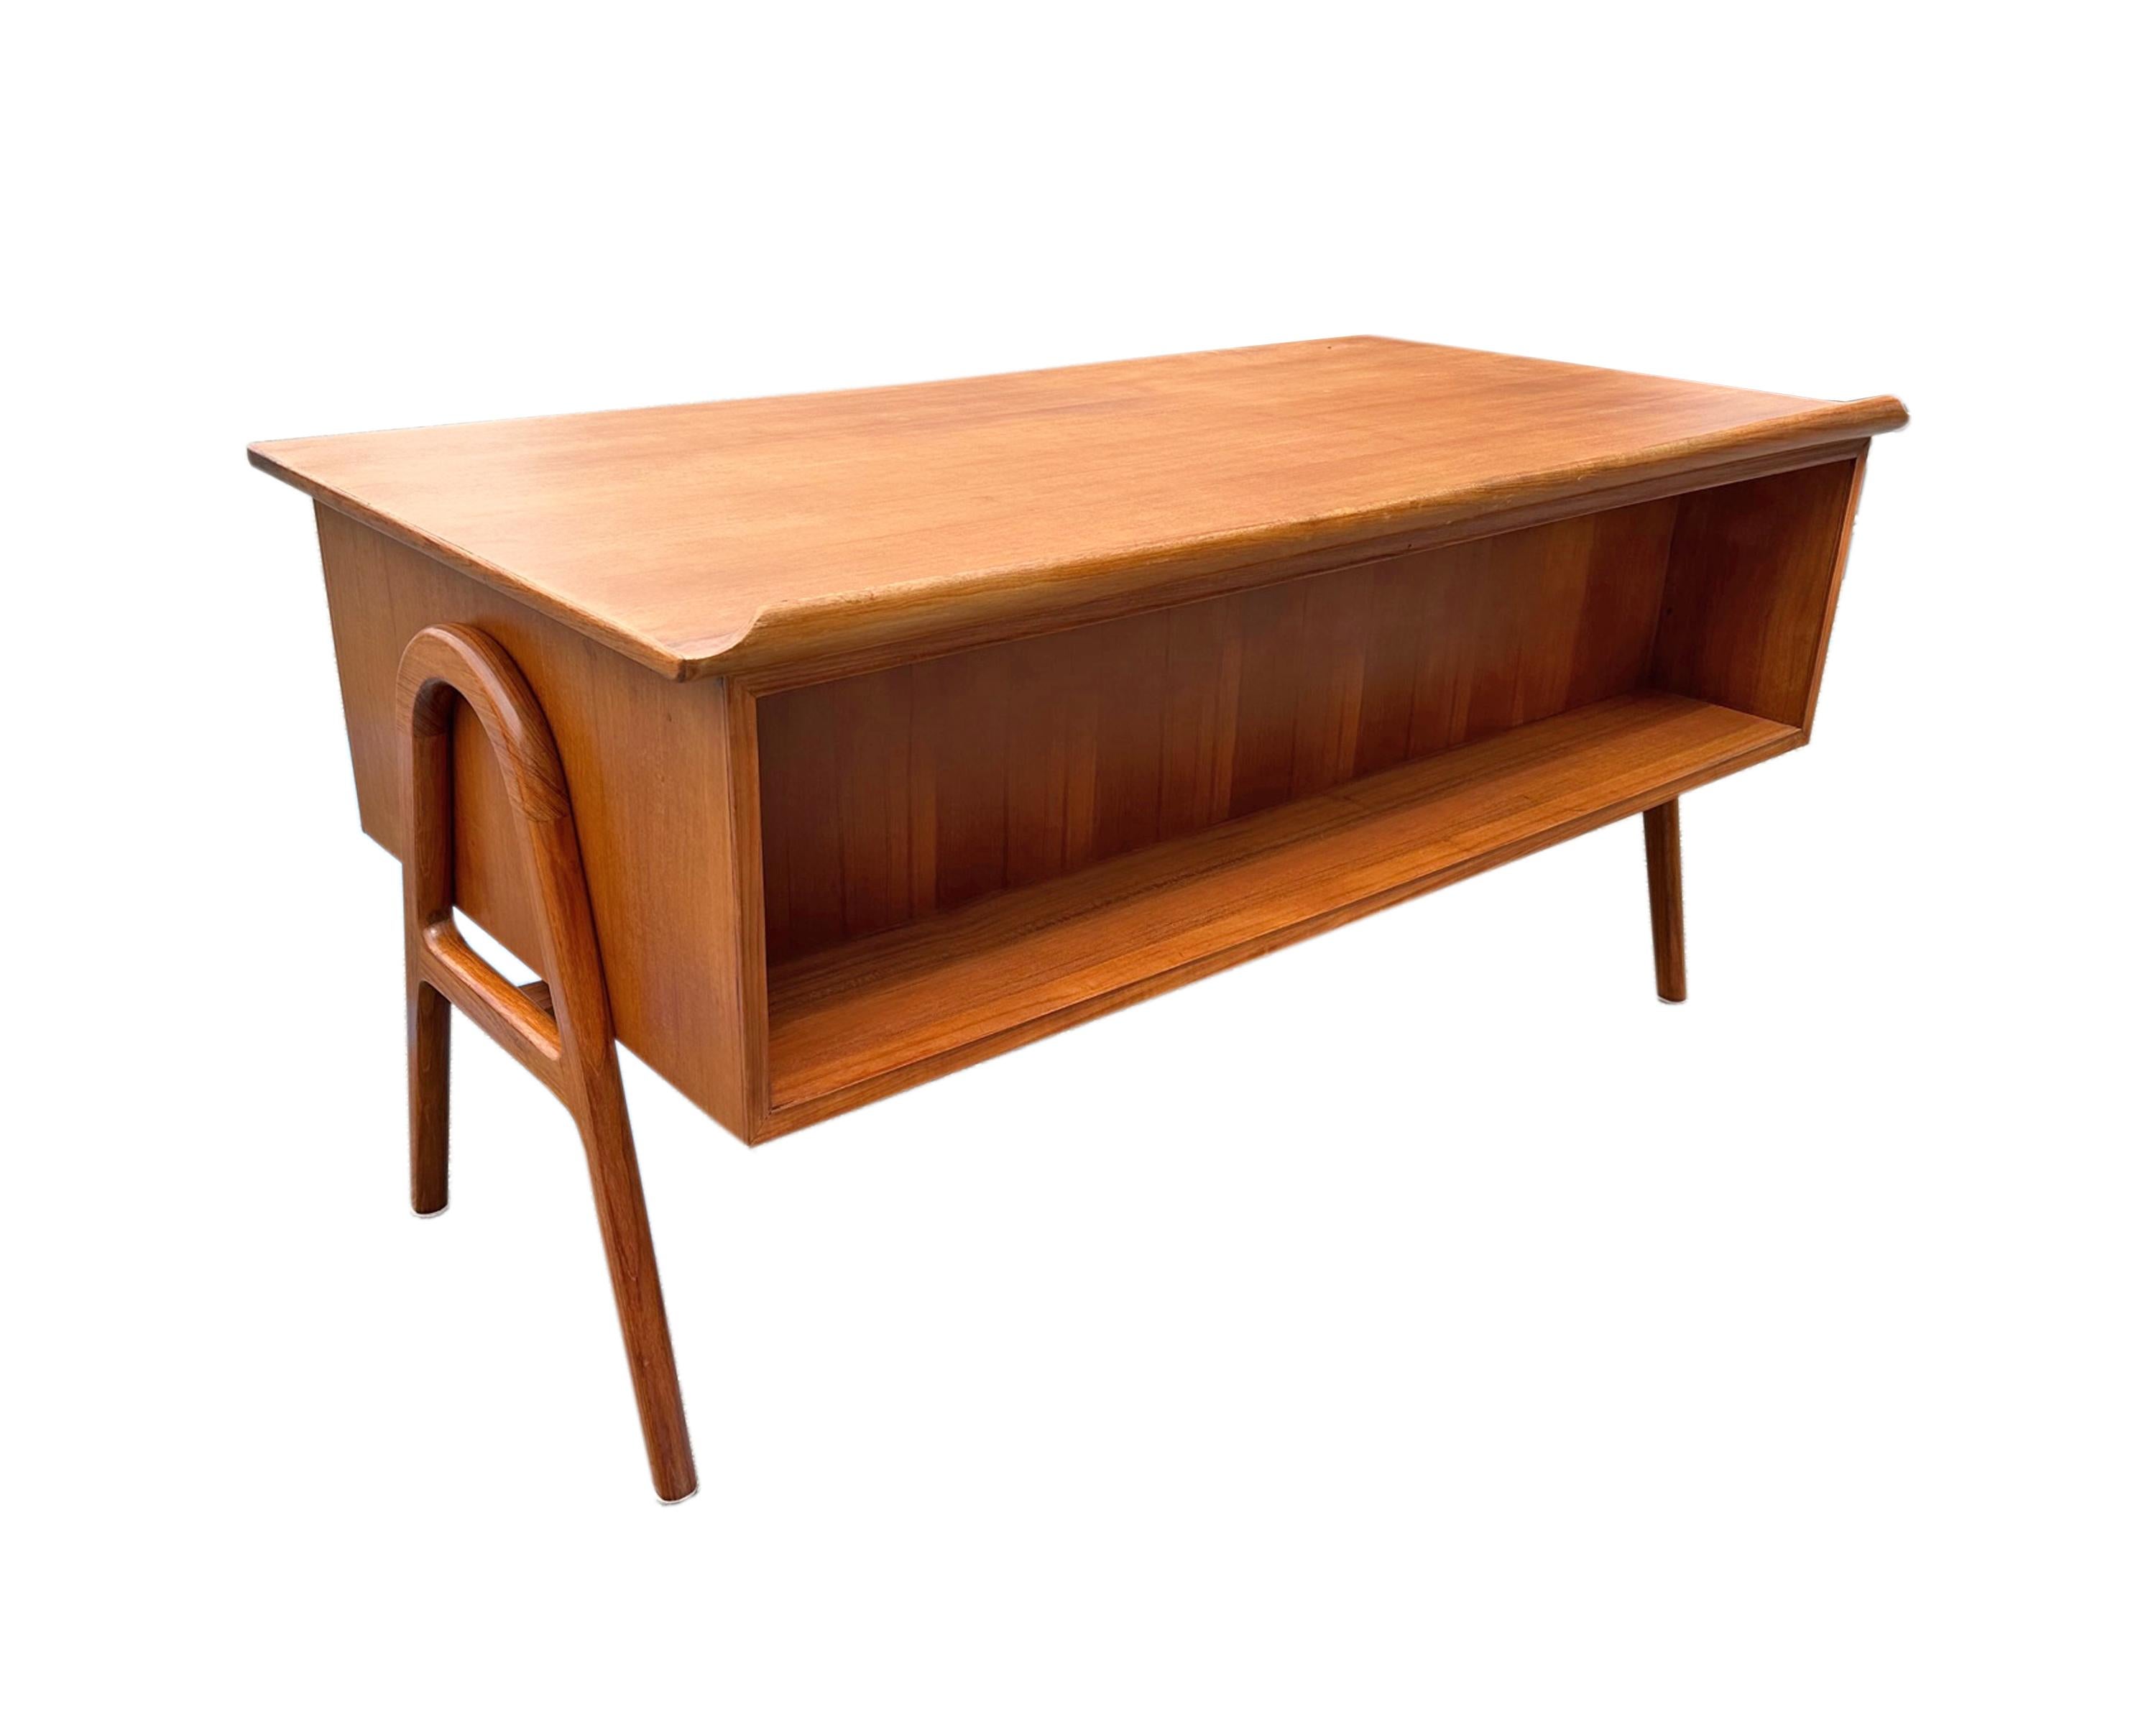 A 1960s modern SH 180 desk designed by Svend Aage Madsen for Sigurd Hansen. Made of teak, this desk has three drawers on the right and a single large filed drawer on the left. The front of the desk has a bookshelf nook and the entire desk stands on